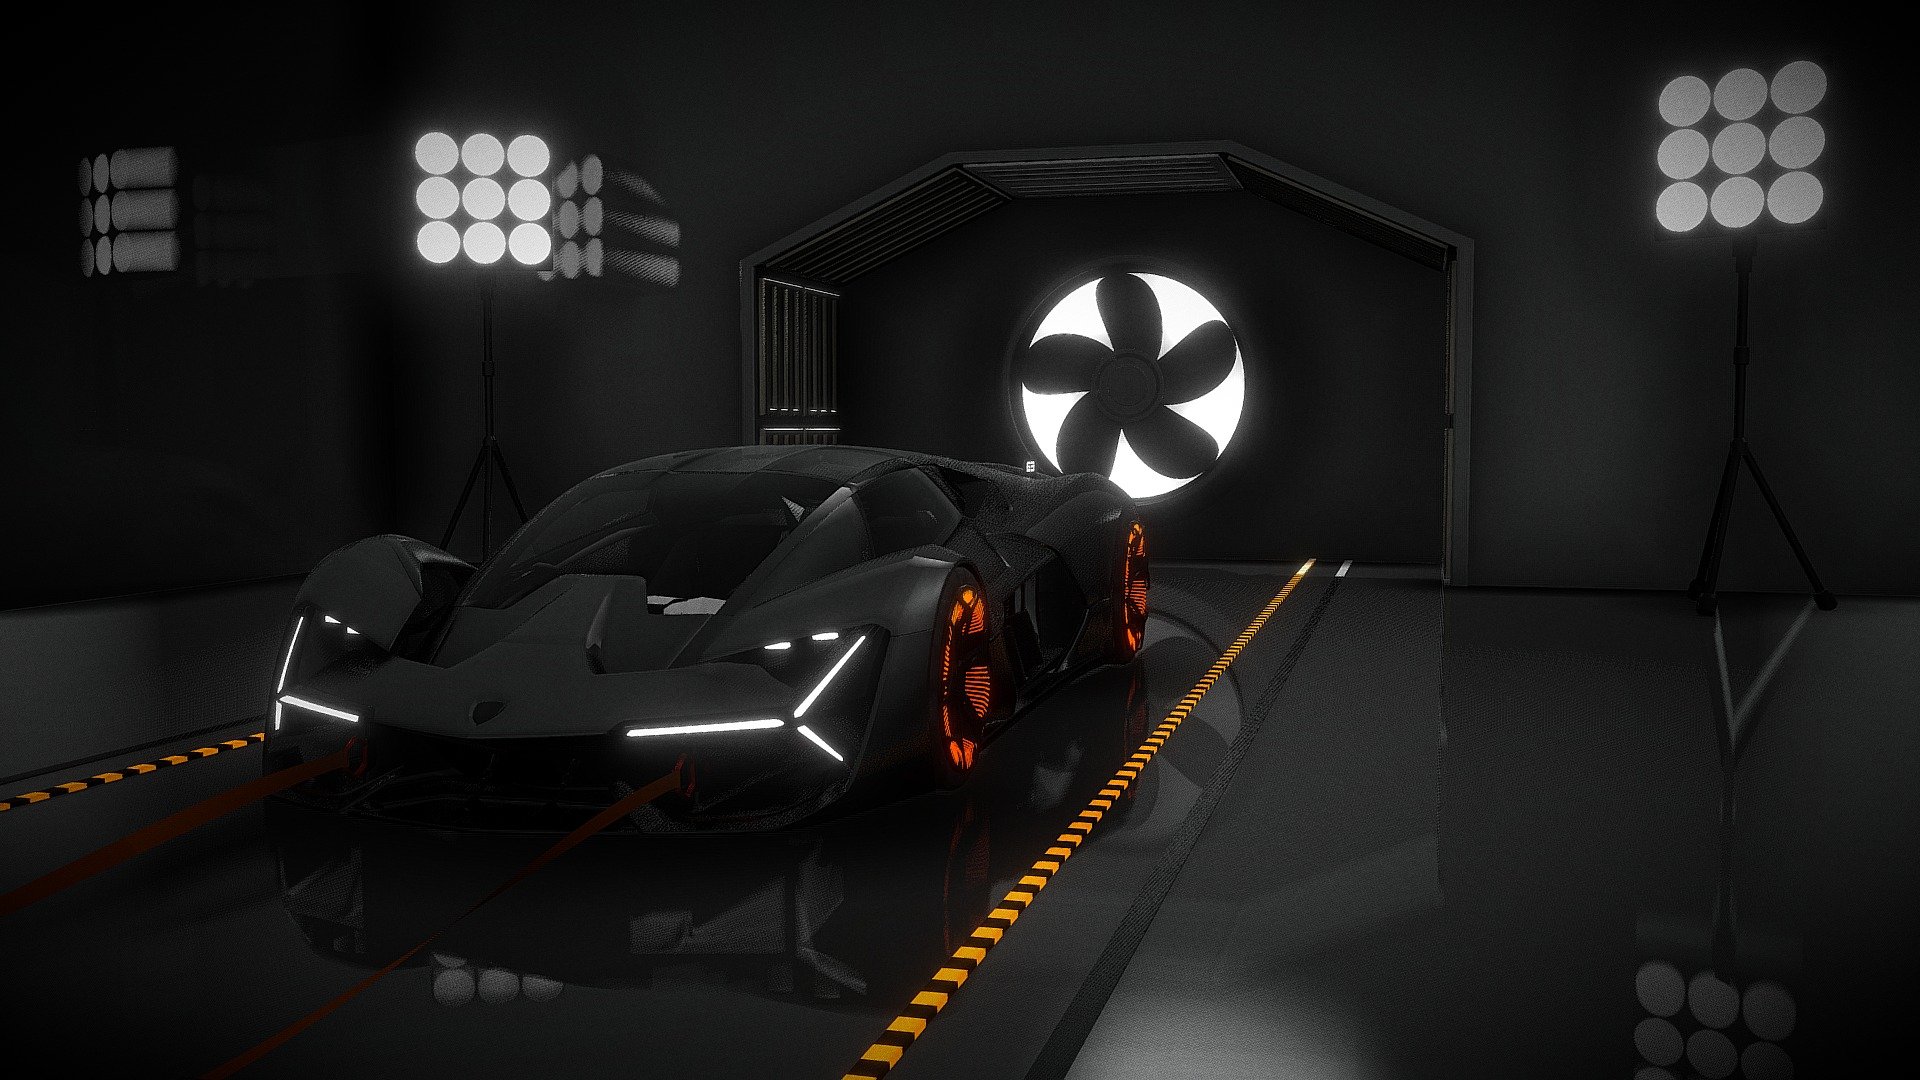 Lamborghini Terzo Millennio (Wind tunnel) + Animation+Sound

The Lamborghini Terzo Millennio is a concept car under development, invented by Lamborghini, it adopts a carbon fiber body, which is able to store electricity (to replace the batteries and reduce the weight).

The model was modeled with a wind tunnel, (which is used to study aerodynamics) the whole was inspired by a photo taken by Lamborghini, in the studio.

Everything was done on Blender 2.9, download and free and royalty free;)

NB: the rendering displayed on your screen (on sketchfab) may be different from that of Blender, I spent more time on that of Sketchfab 3d model